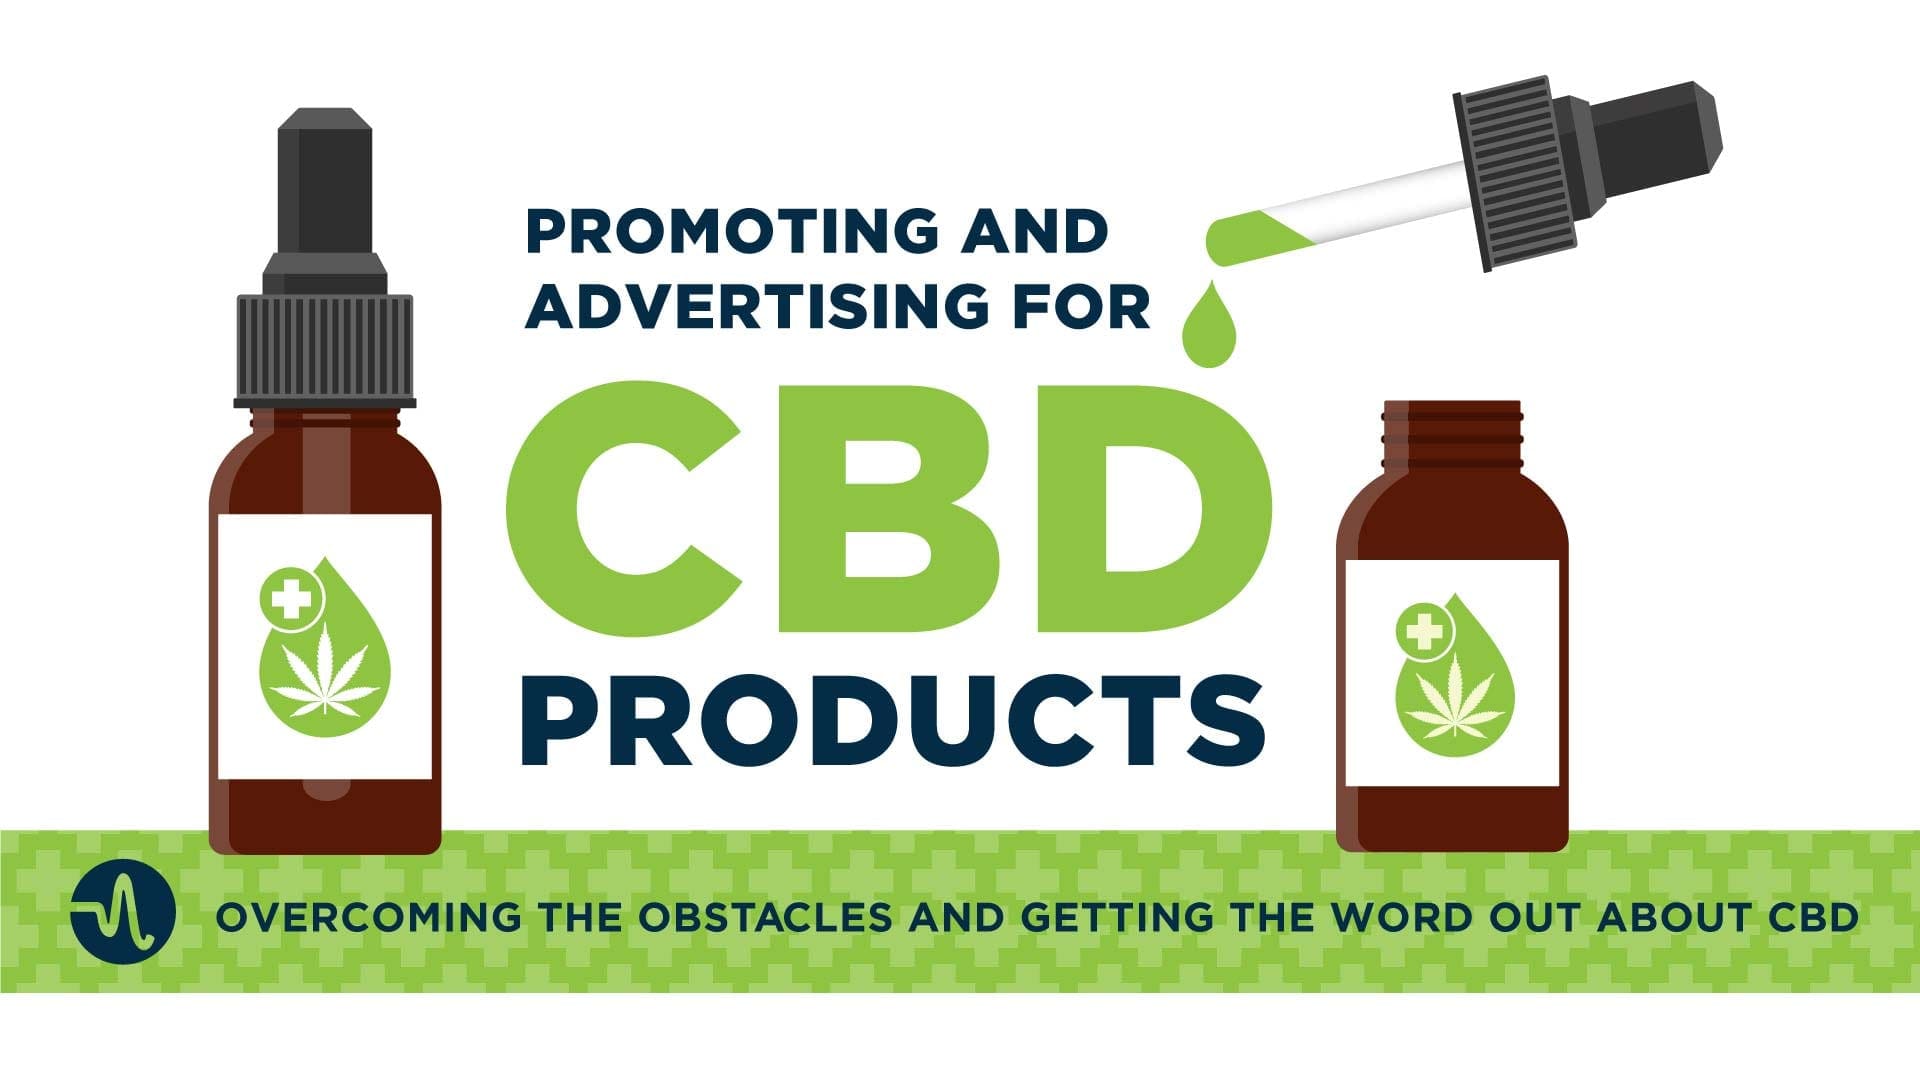 Promoting and Advertising CBD Products